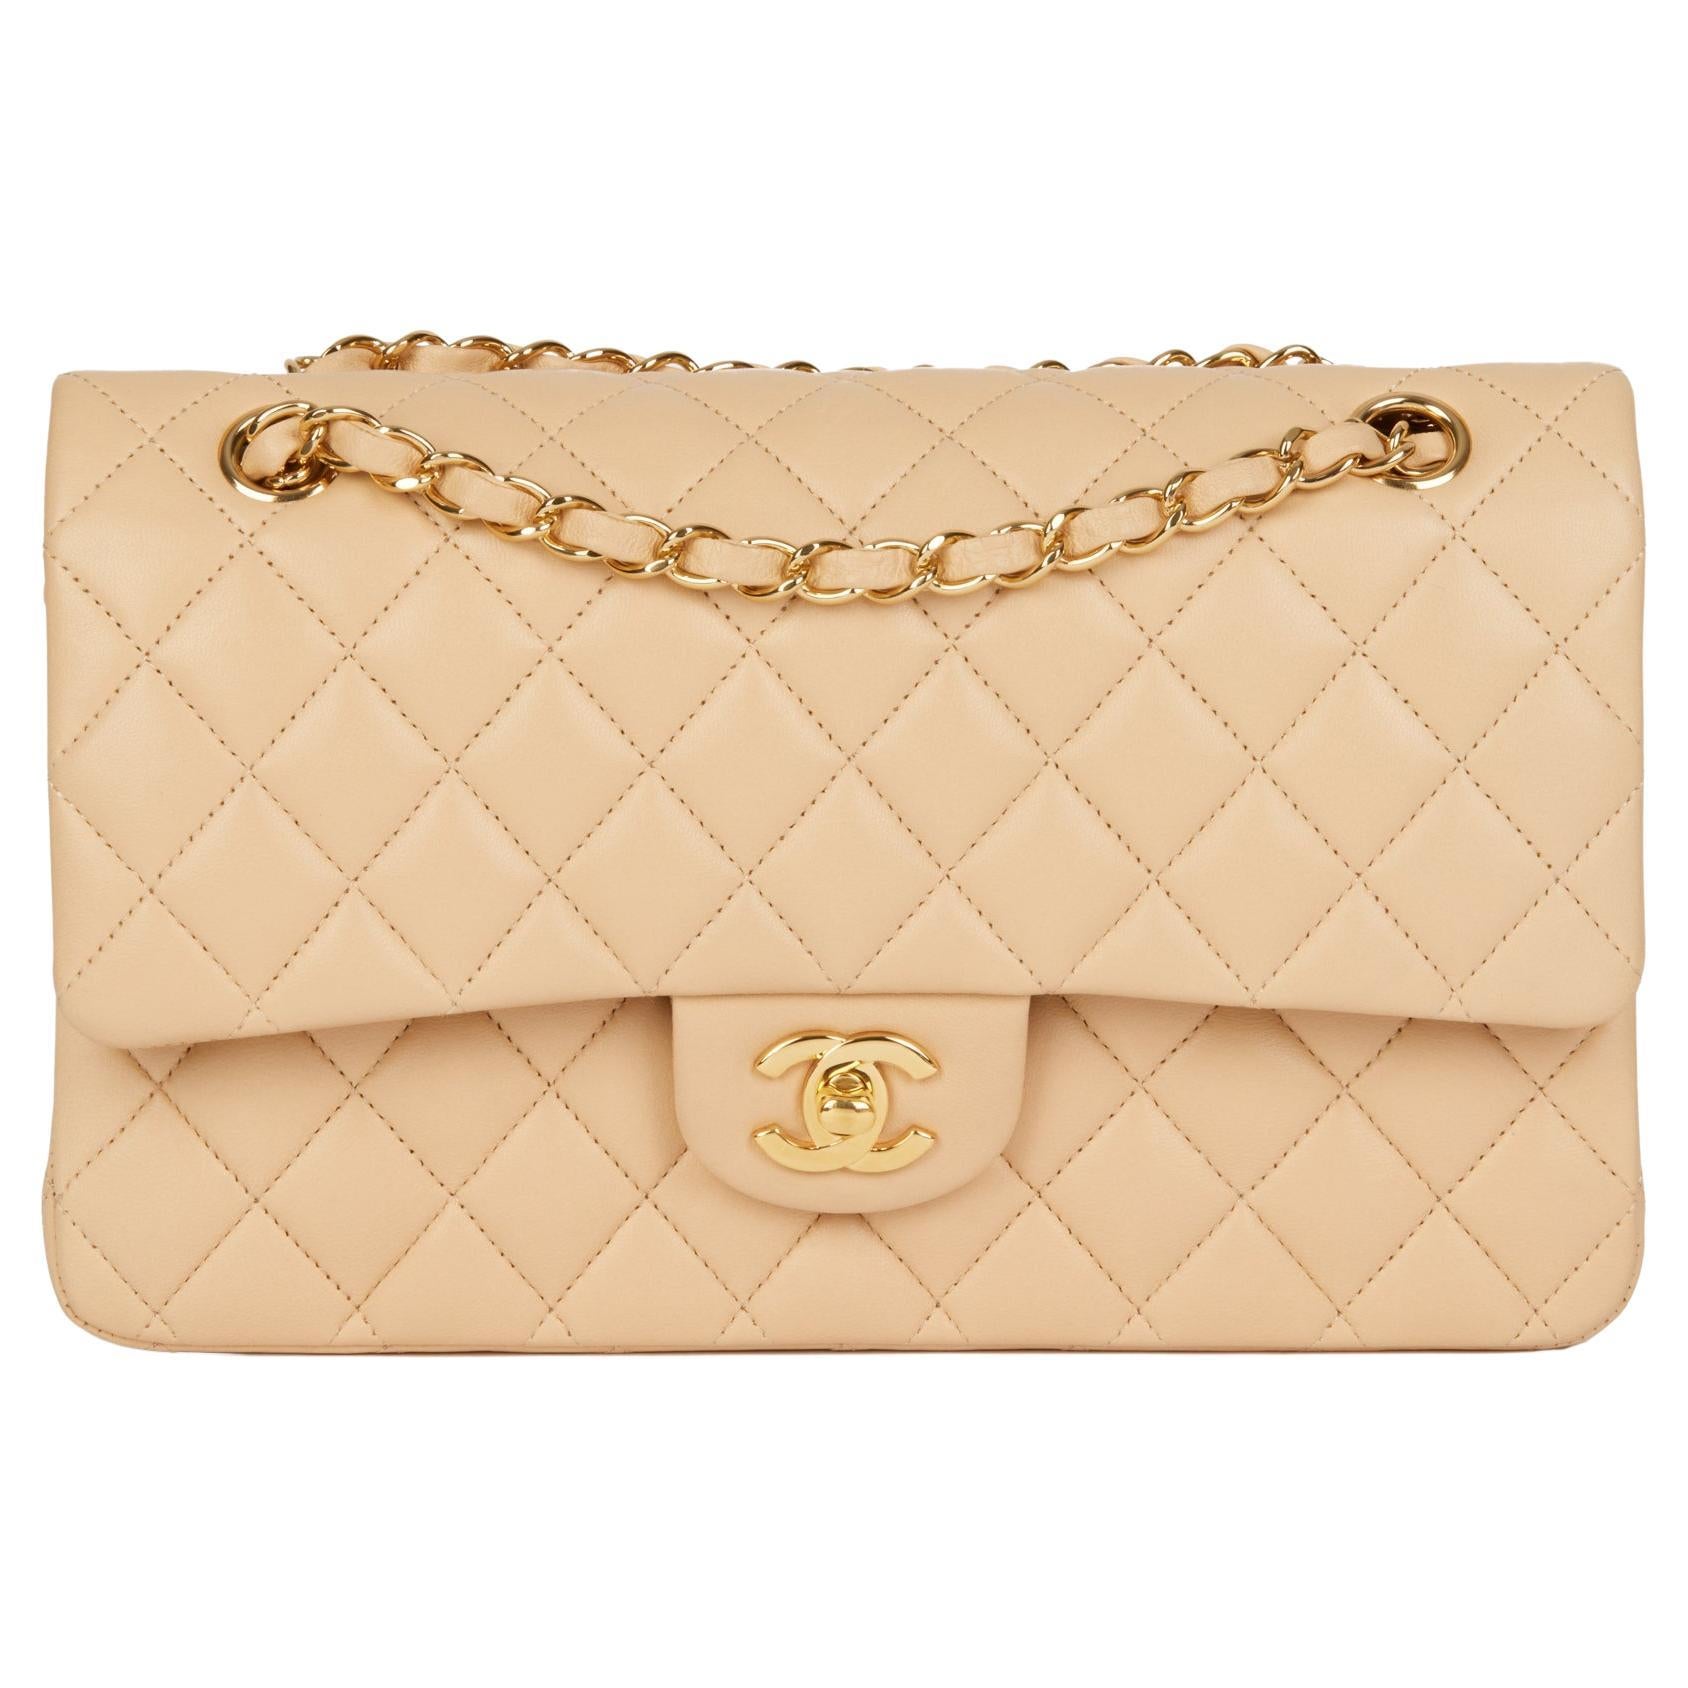 CHANEL Beige Quilted Lambskin Medium Classic Double Flap Bag